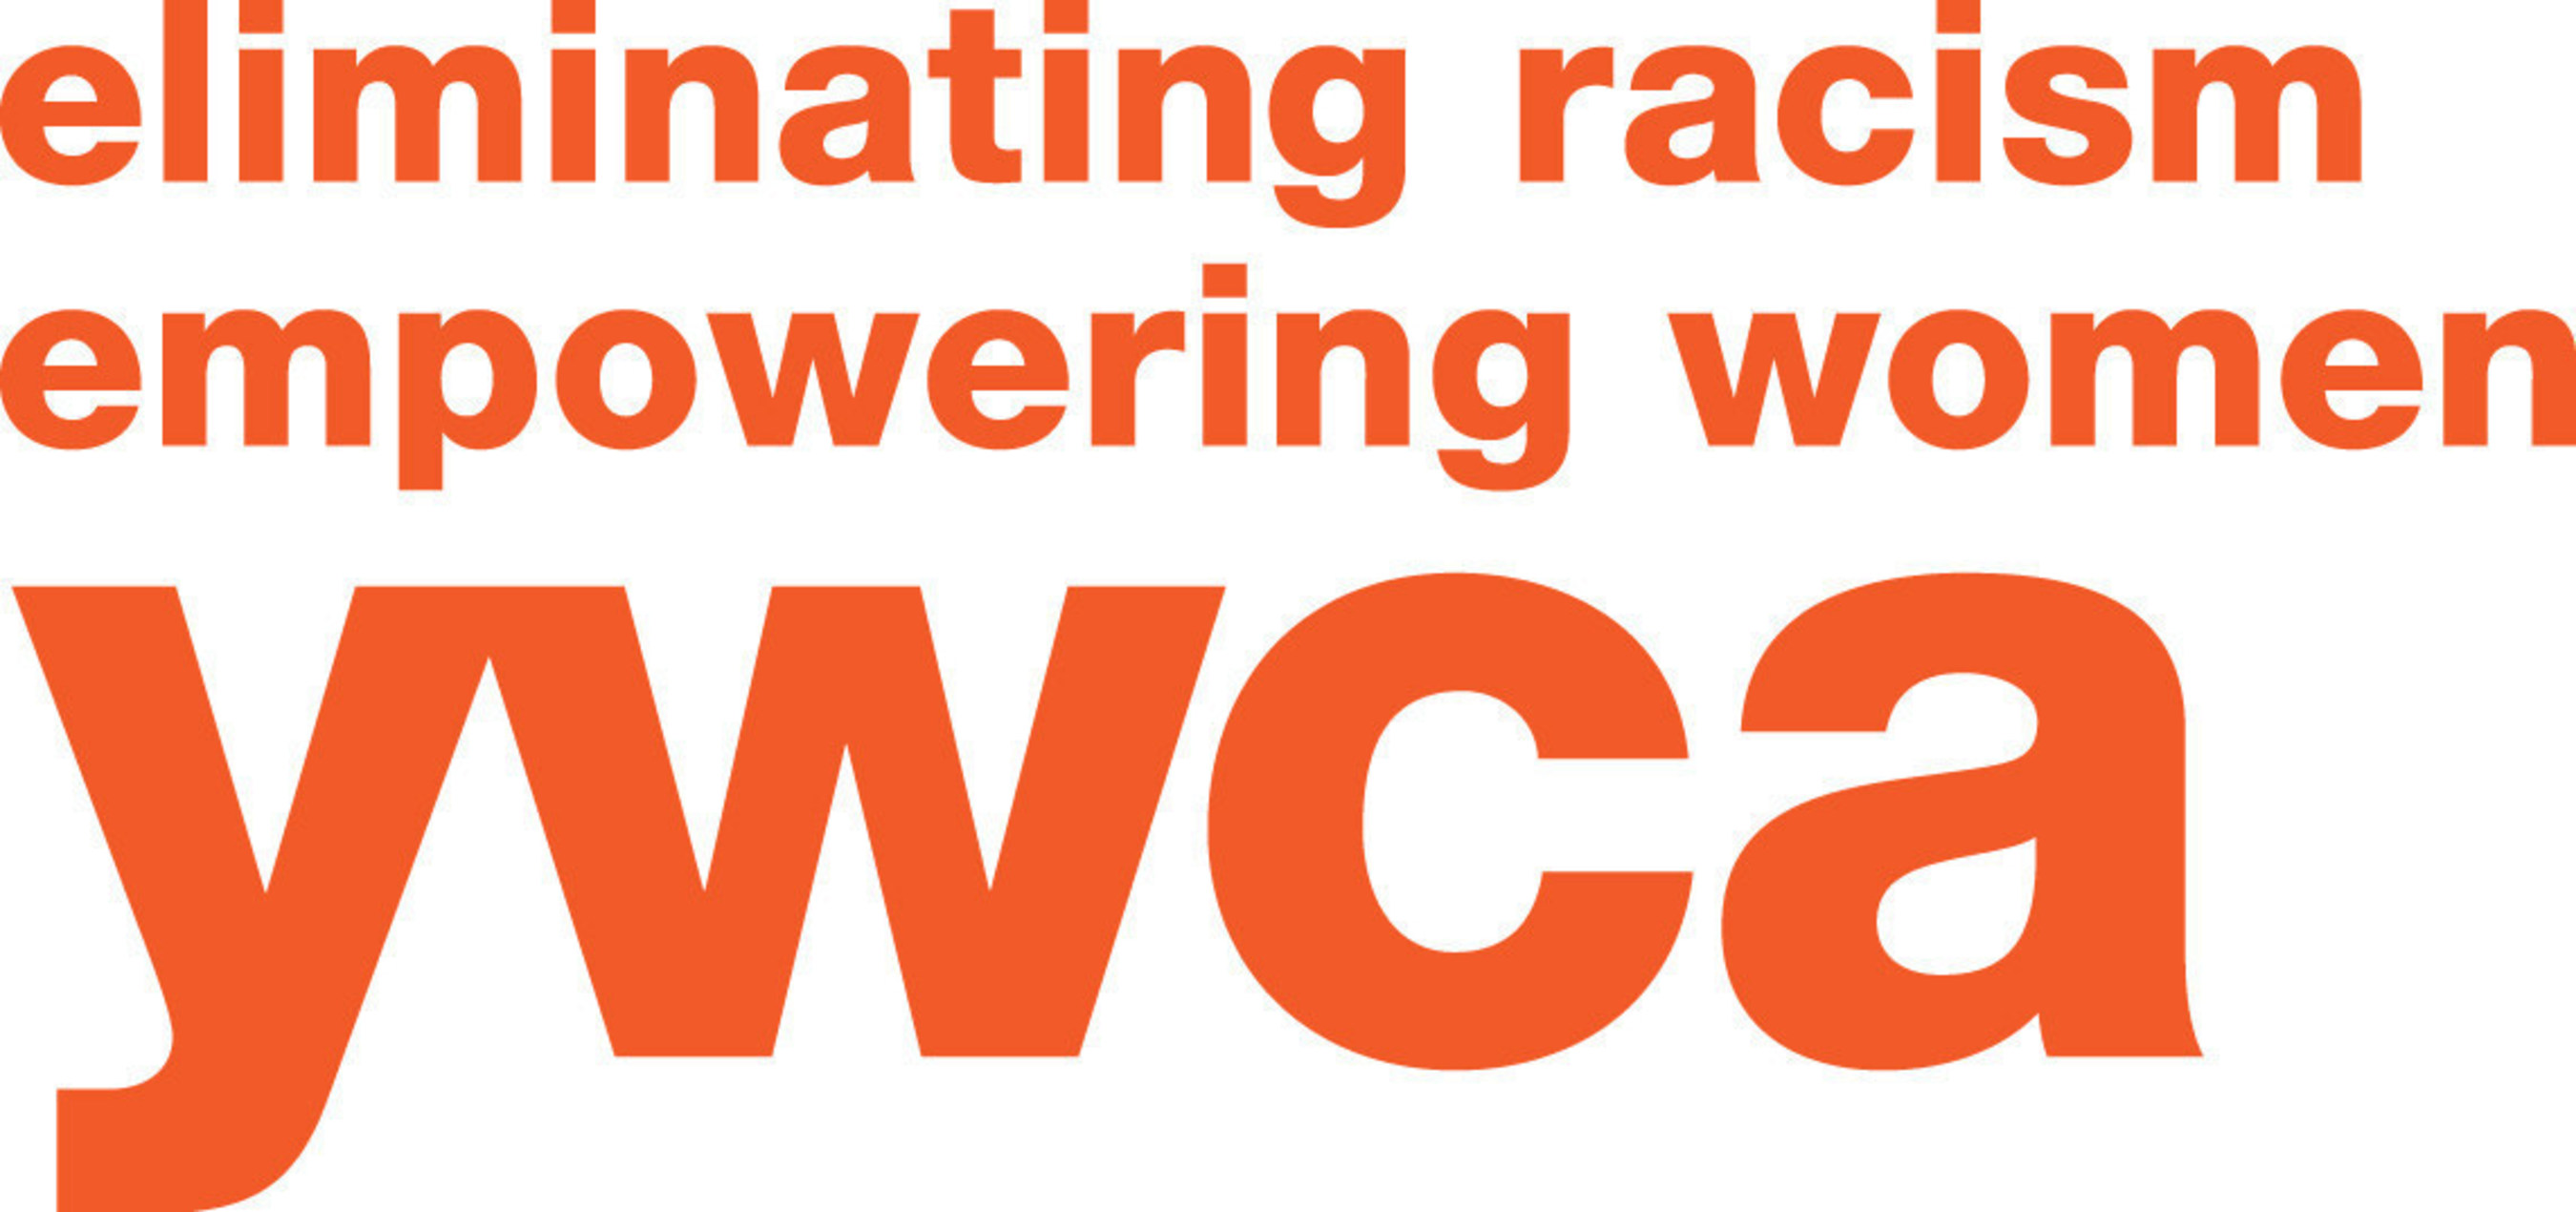 YWCA is on a mission!